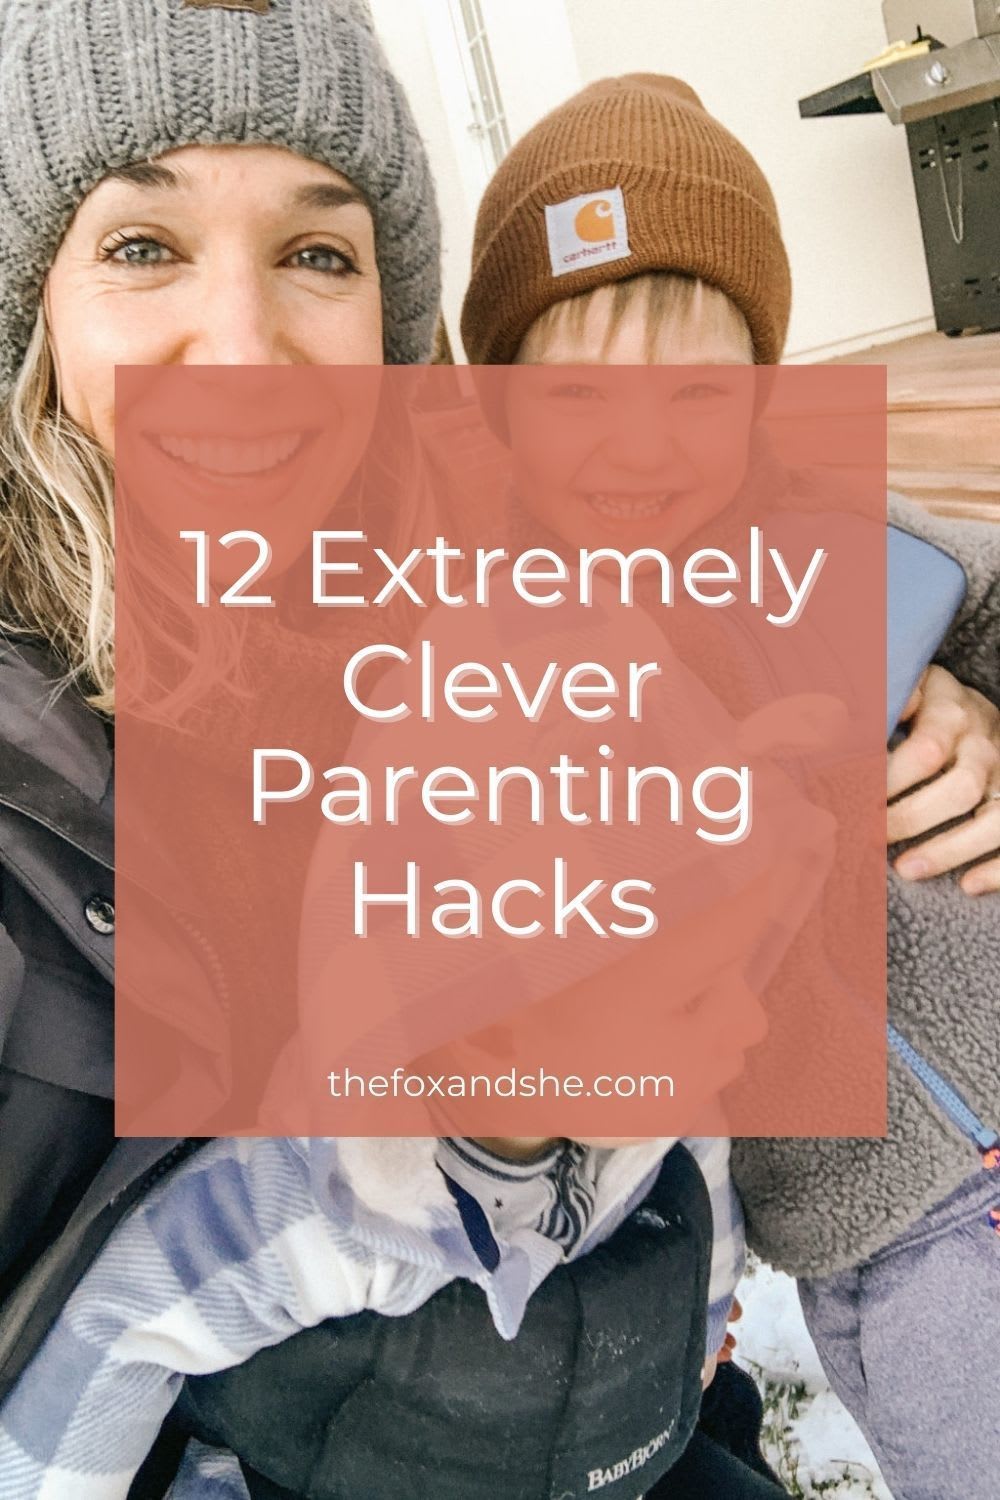 12 Extremely Clever Parenting Hacks - The Fox & She